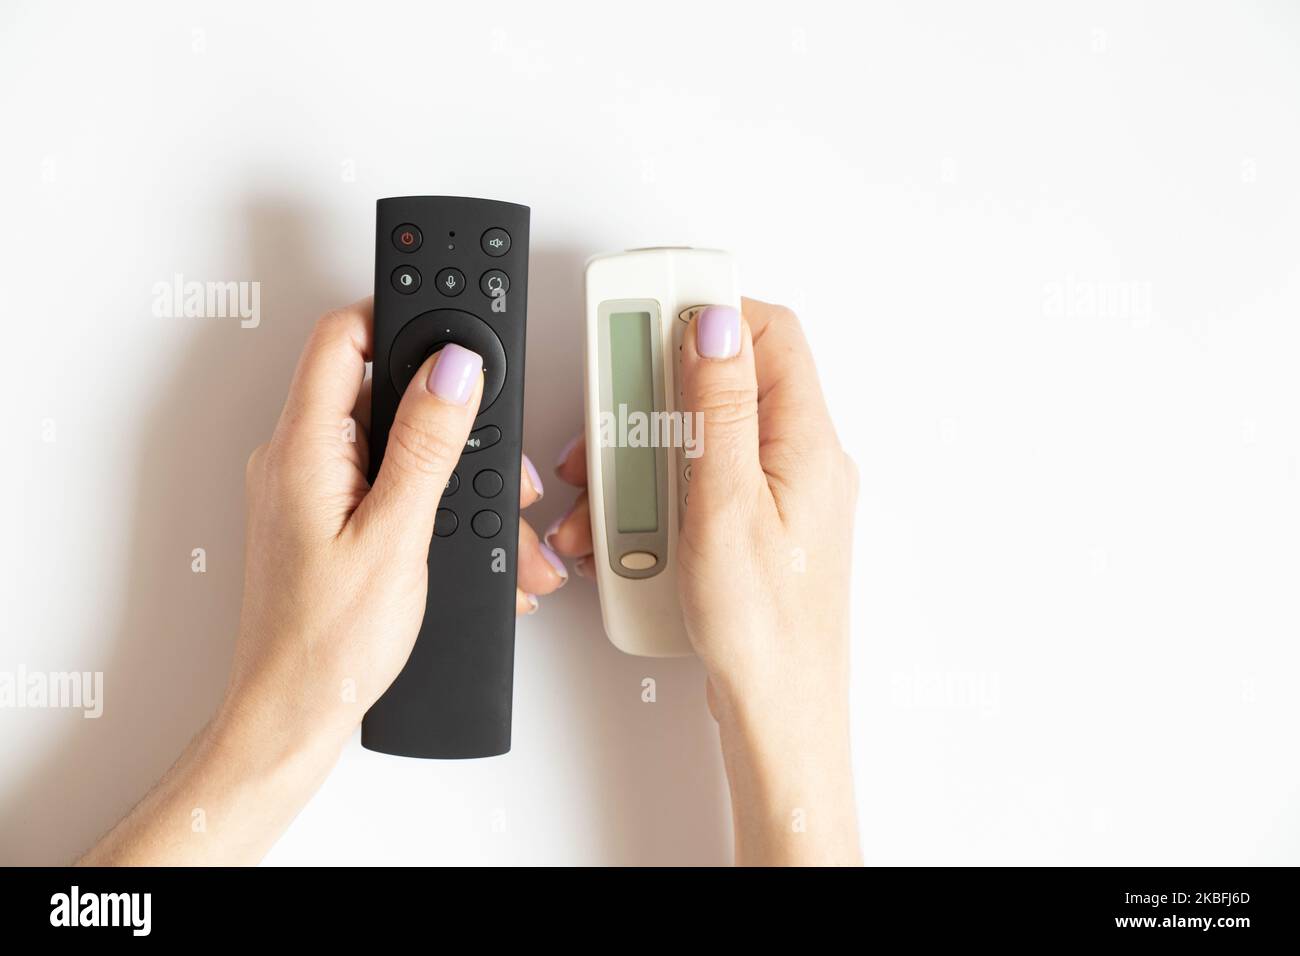 Two remote controls in female hands on a white background close-up, TV remote control Stock Photo